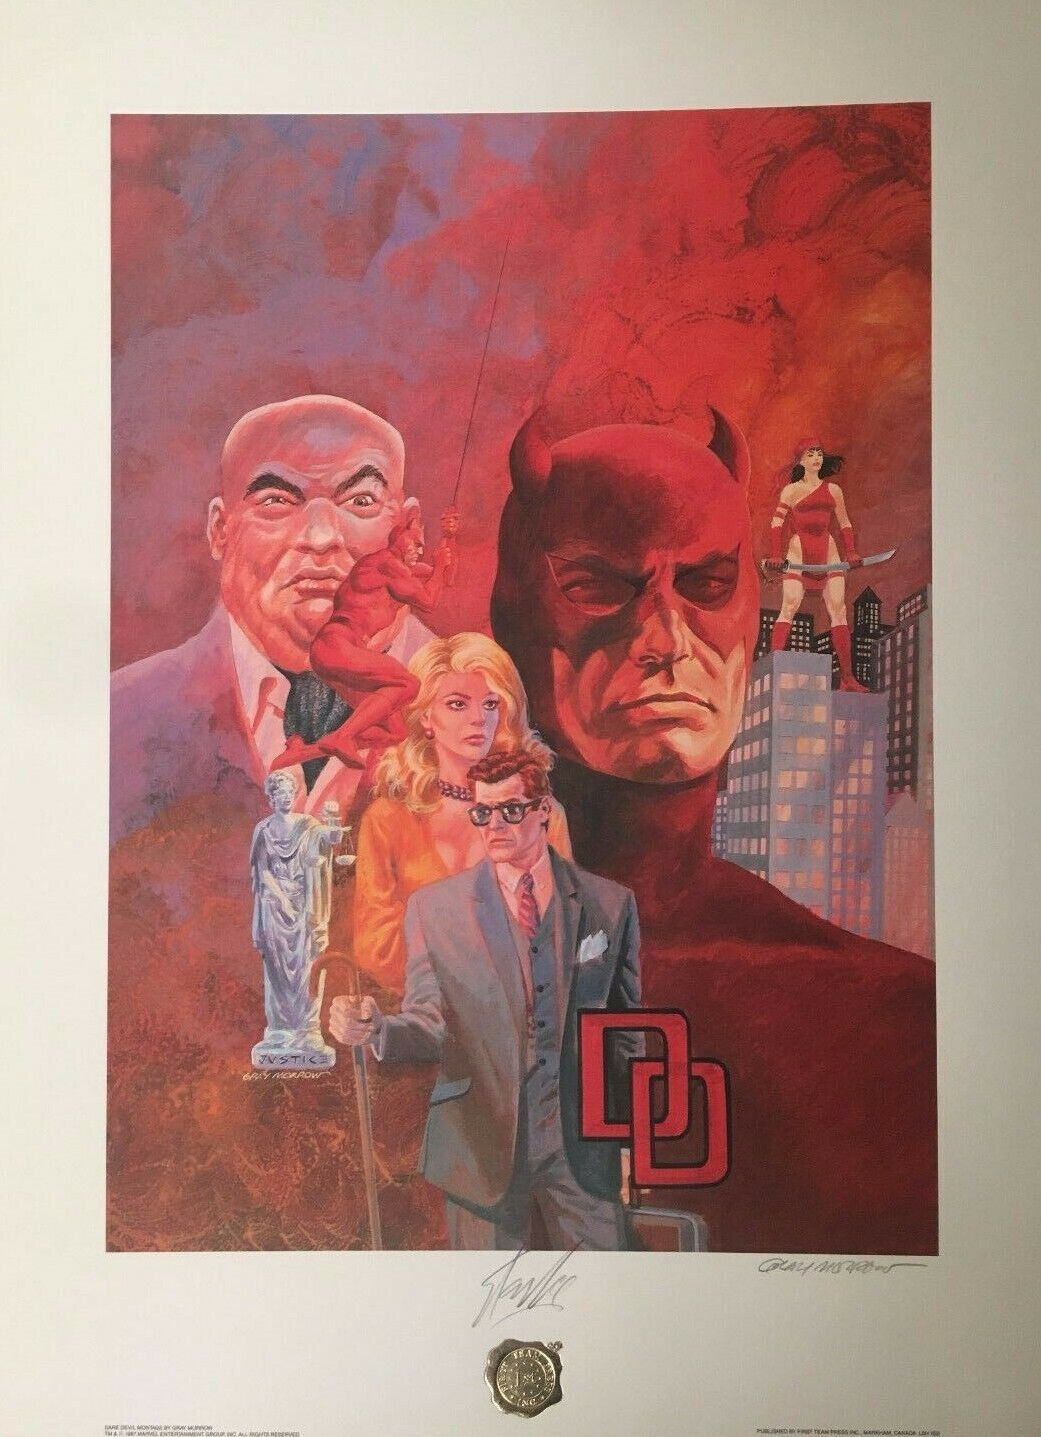 Daredevil Montage Litho Signed by Gray Morrow and Marvel's Stan Lee